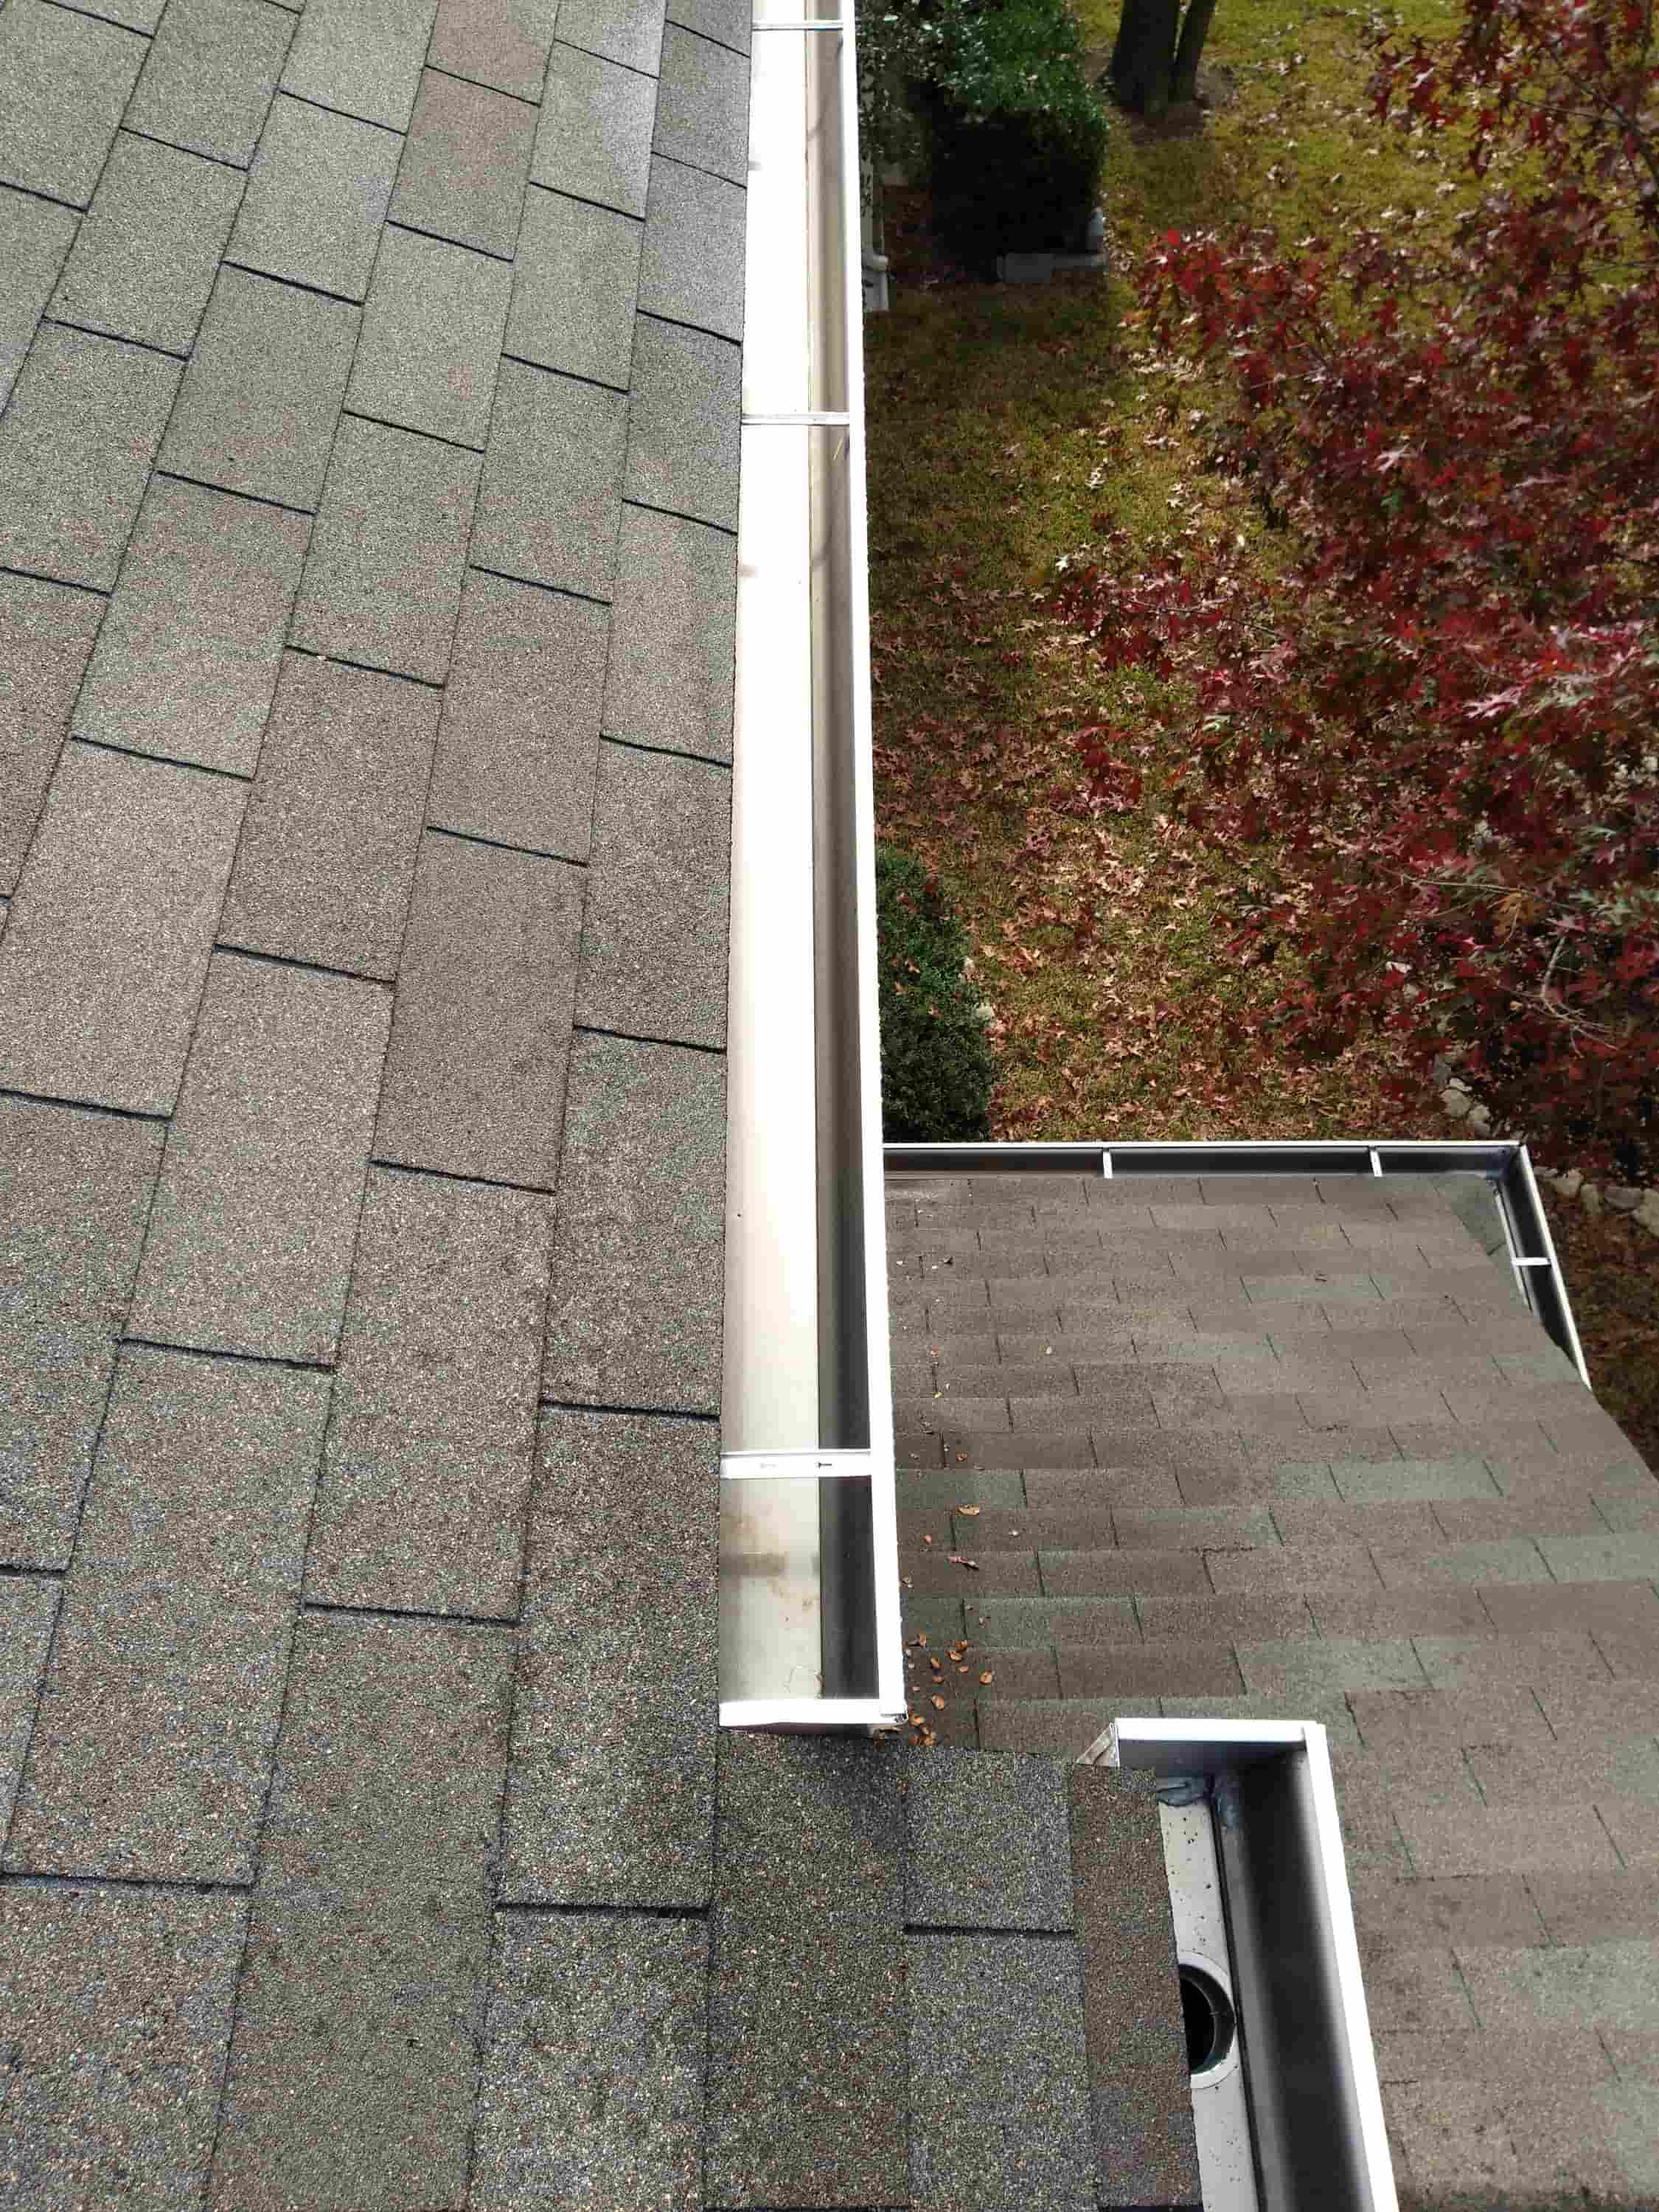 gutter cleaning safety